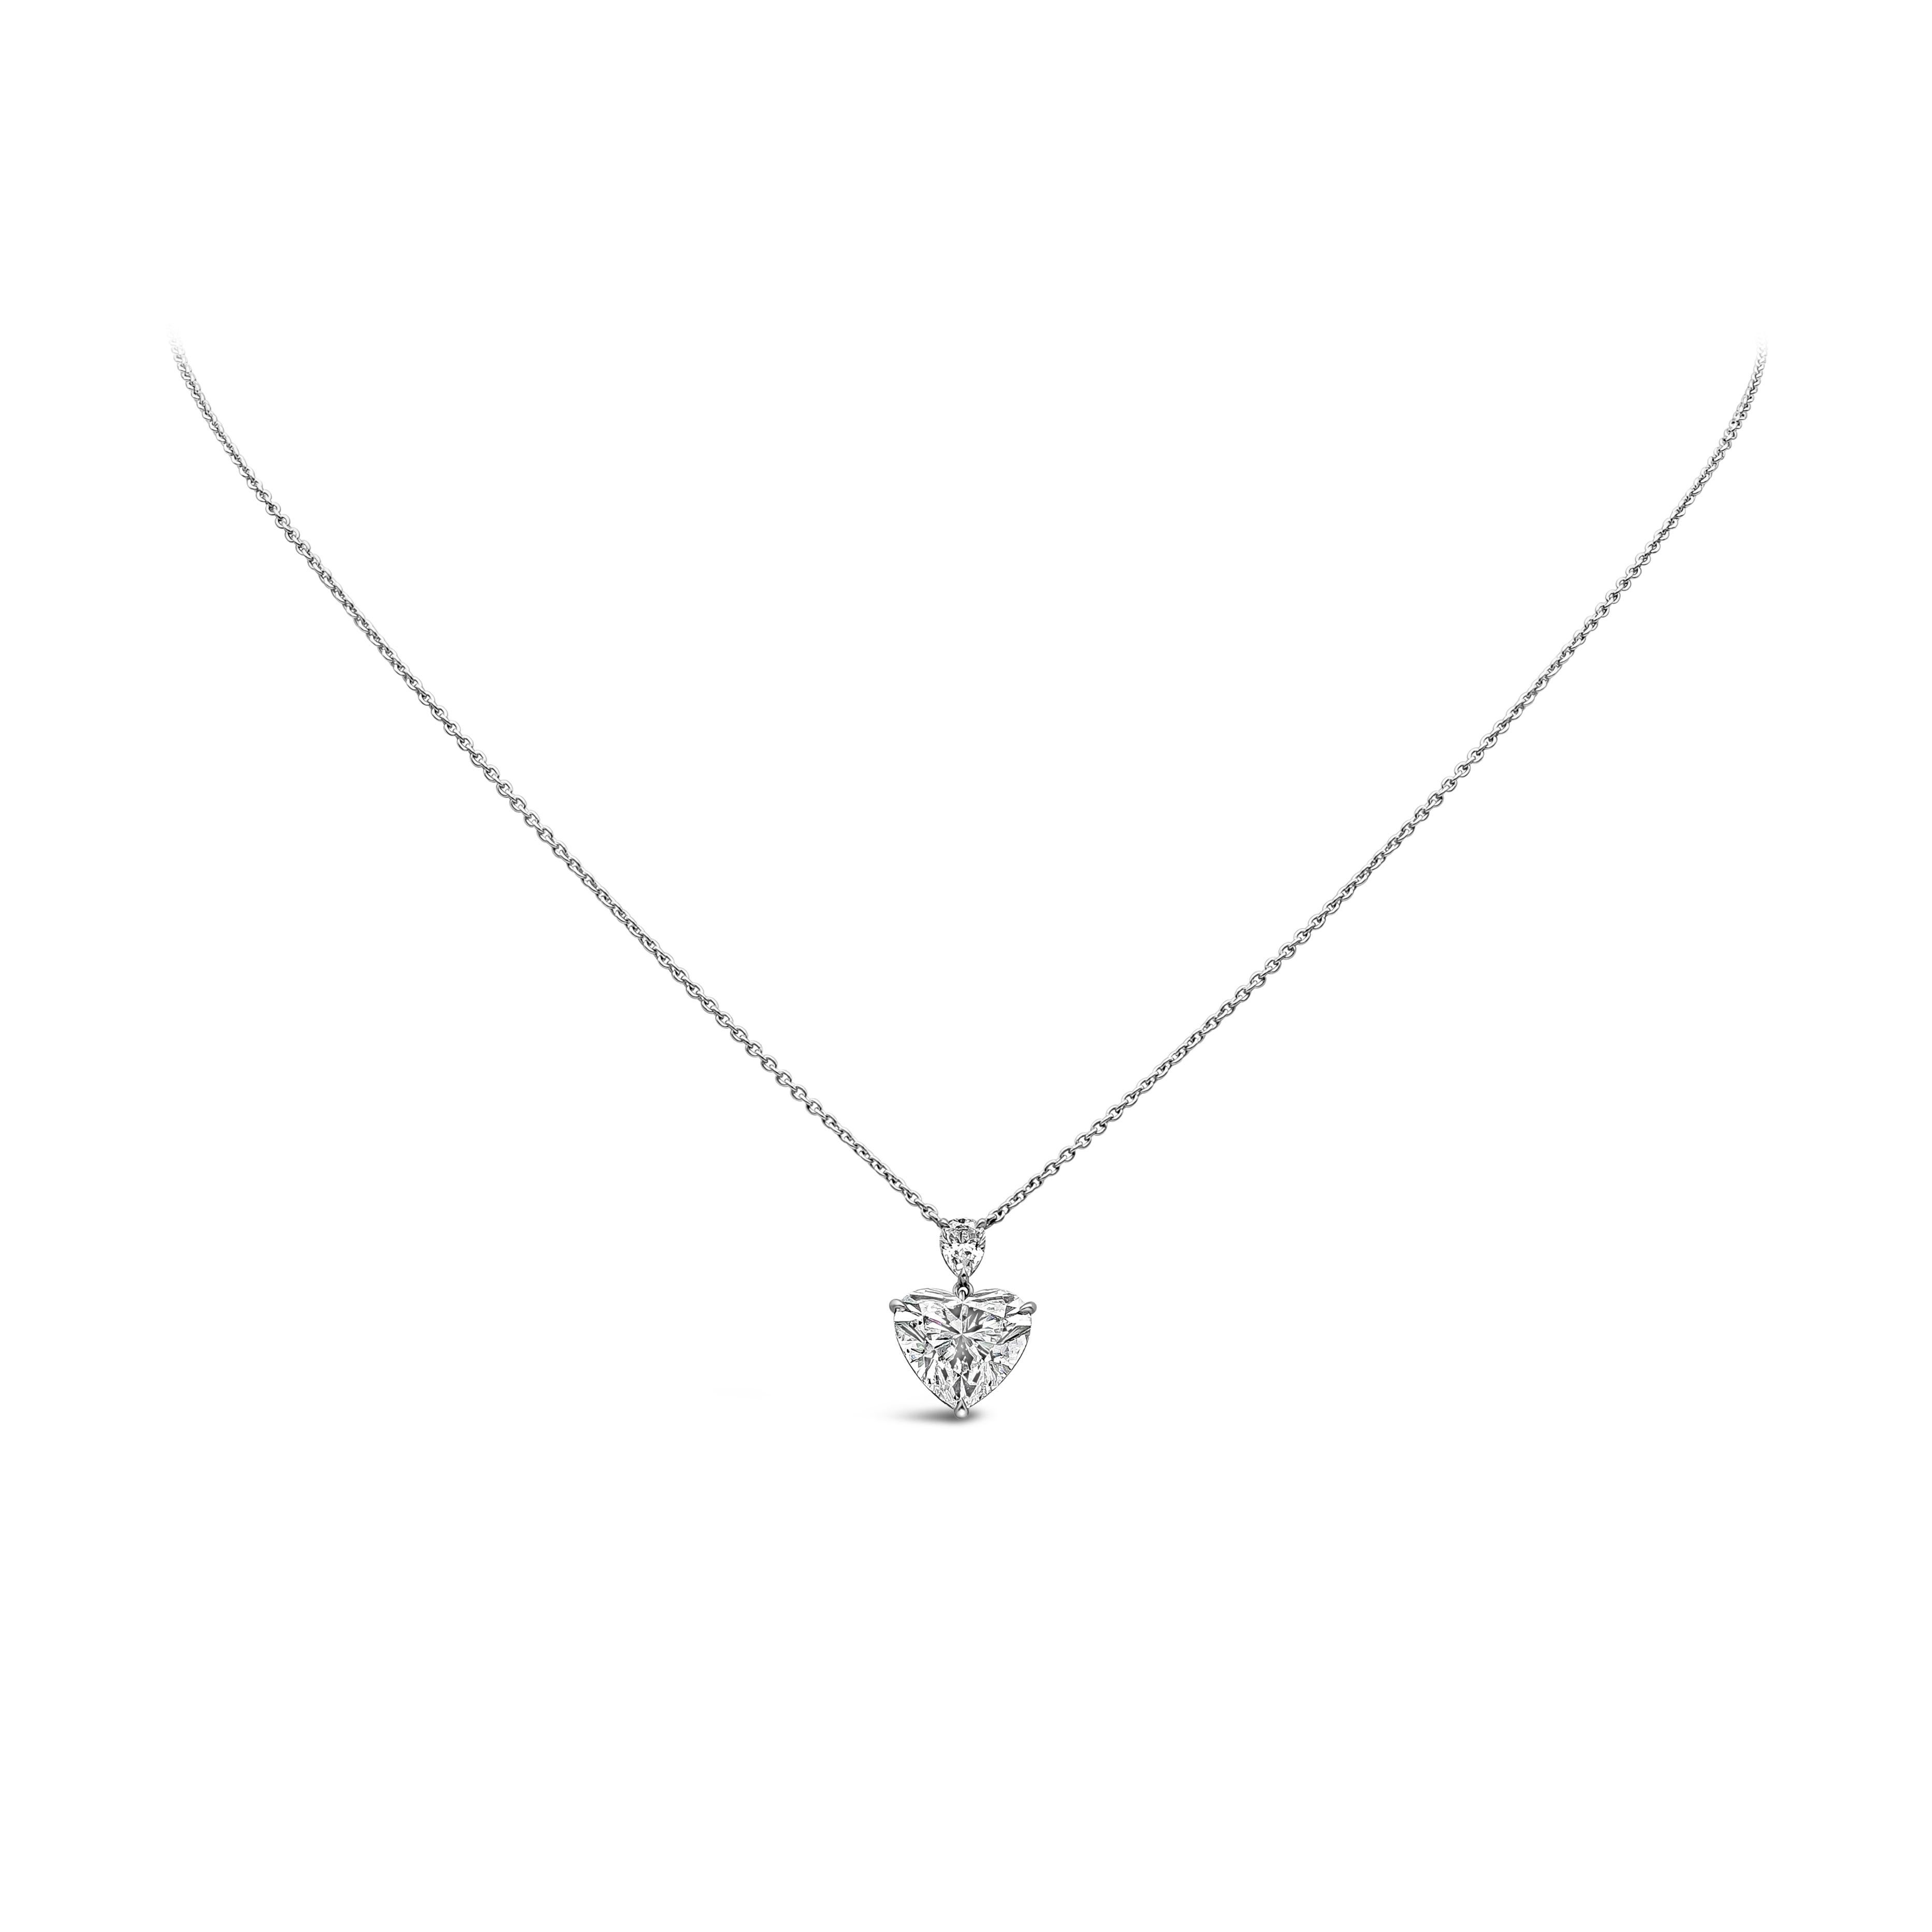 This beautiful pendant necklace showcases a 3.21 carat heart shape diamond GIA certified as H color and SI2 in clarity. Set in a three prong setting hanging from a 0.23 carat pear shape diamond.  Connected to a 16 inch platinum chain.

Roman Malakov